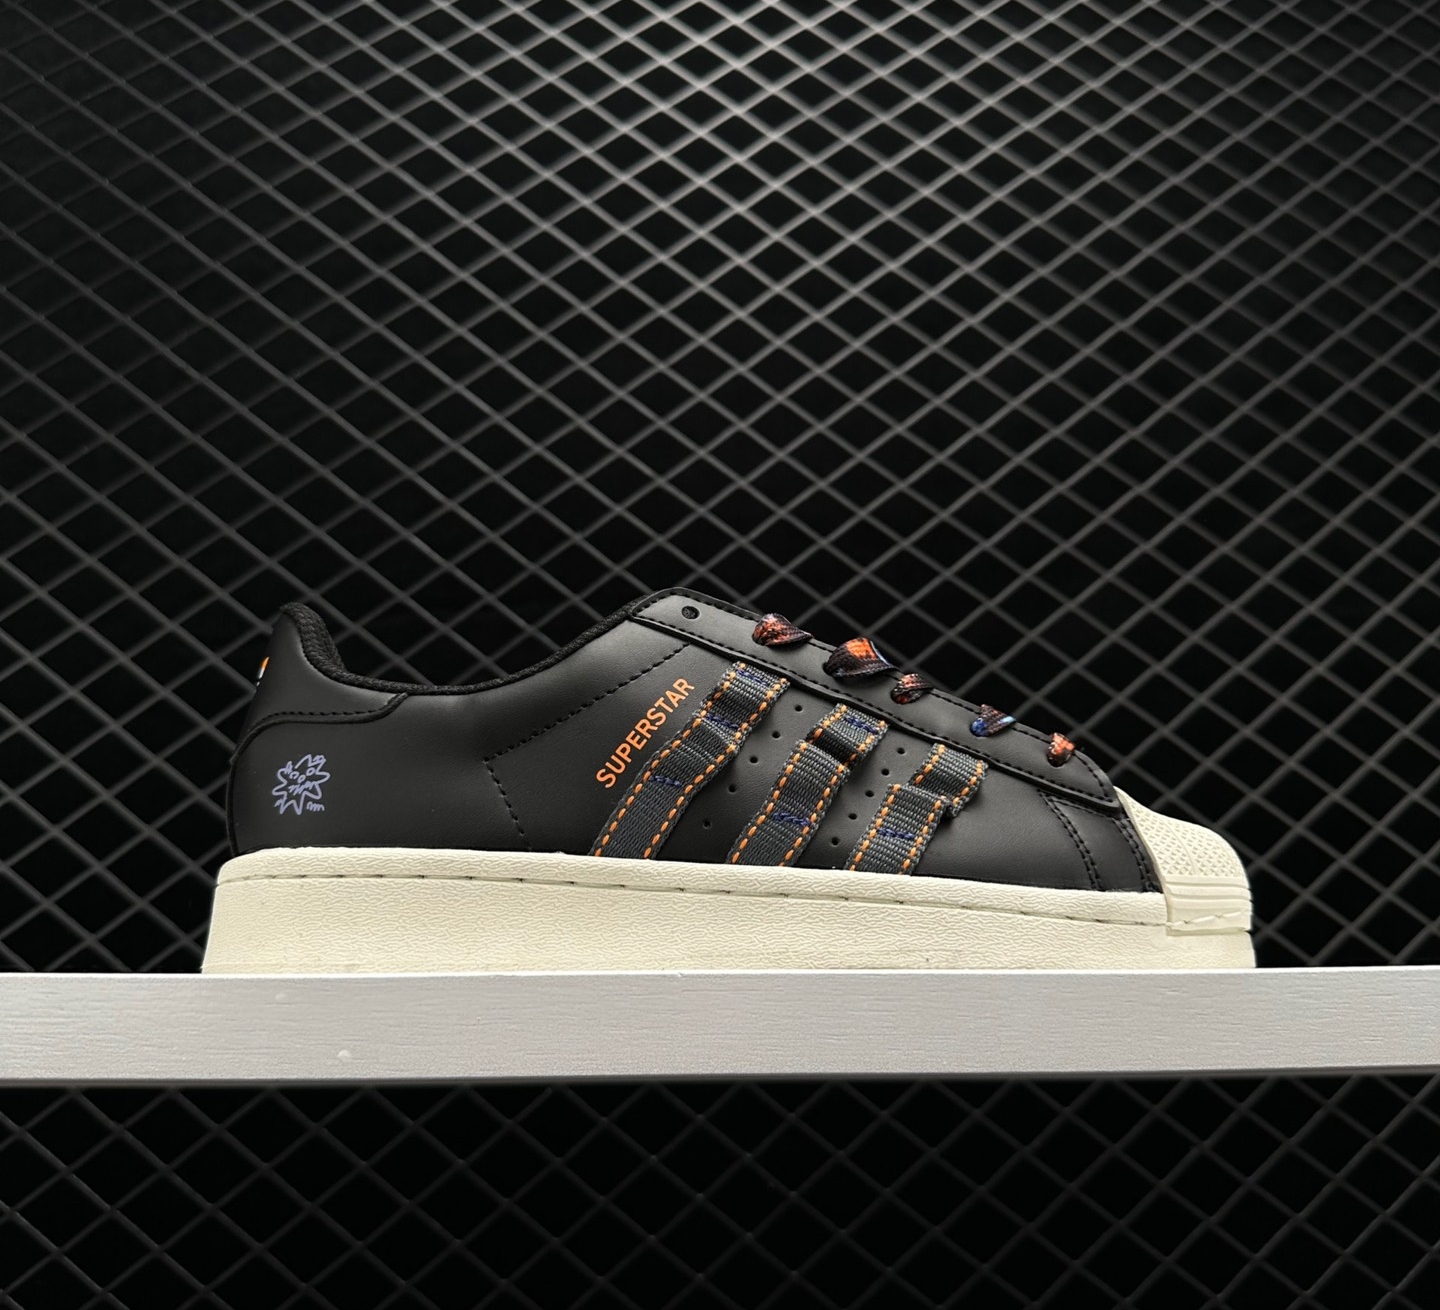 Adidas Originals Superstar Black HQ6451 - Iconic Style and Quality